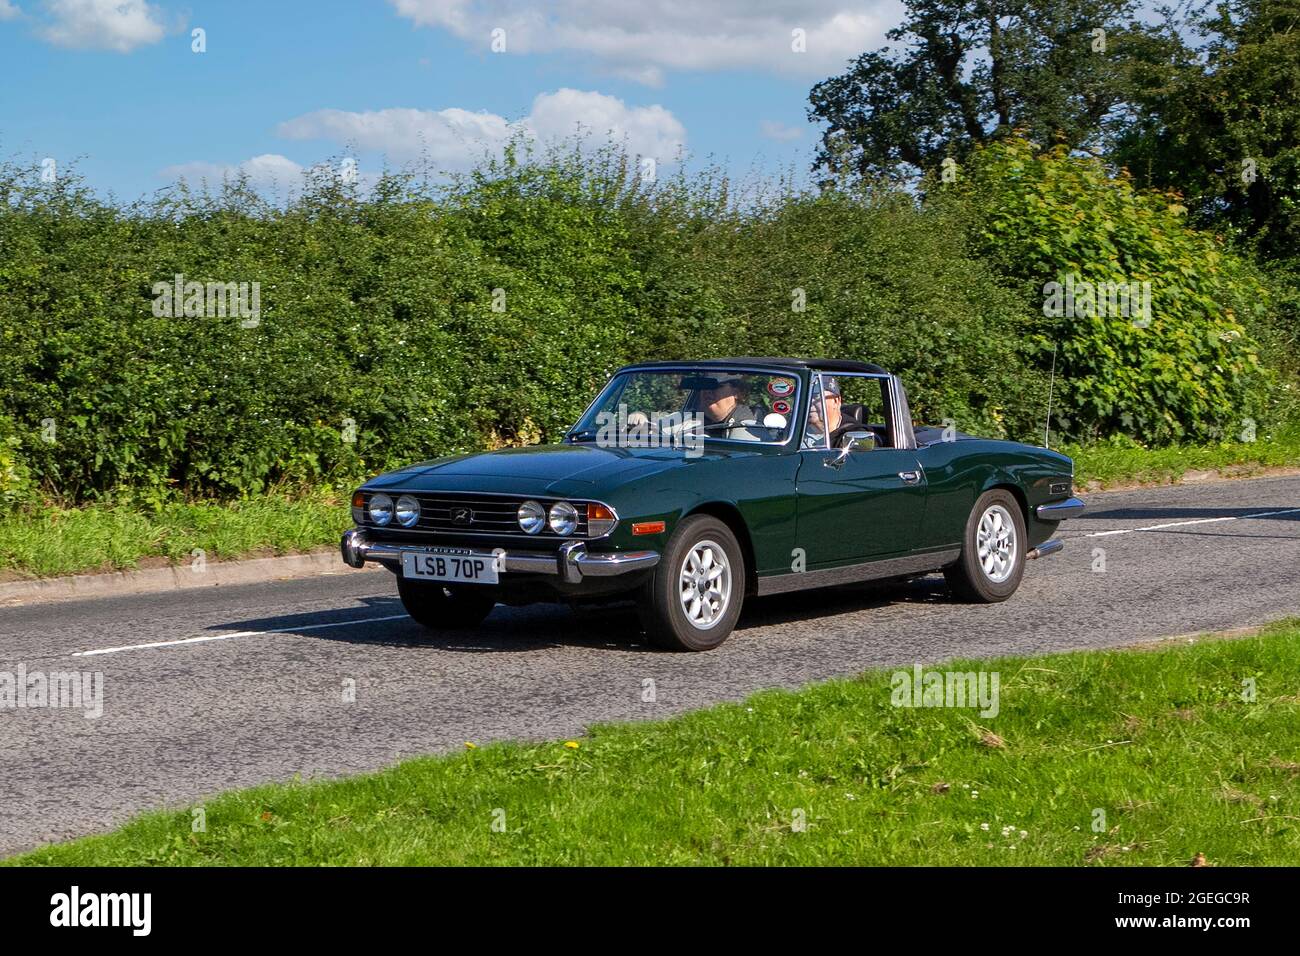 A front view of 1976 1970s 70s Petrol Green Triumph Stag vintage classic car retro driver vehicle automobile Stock Photo